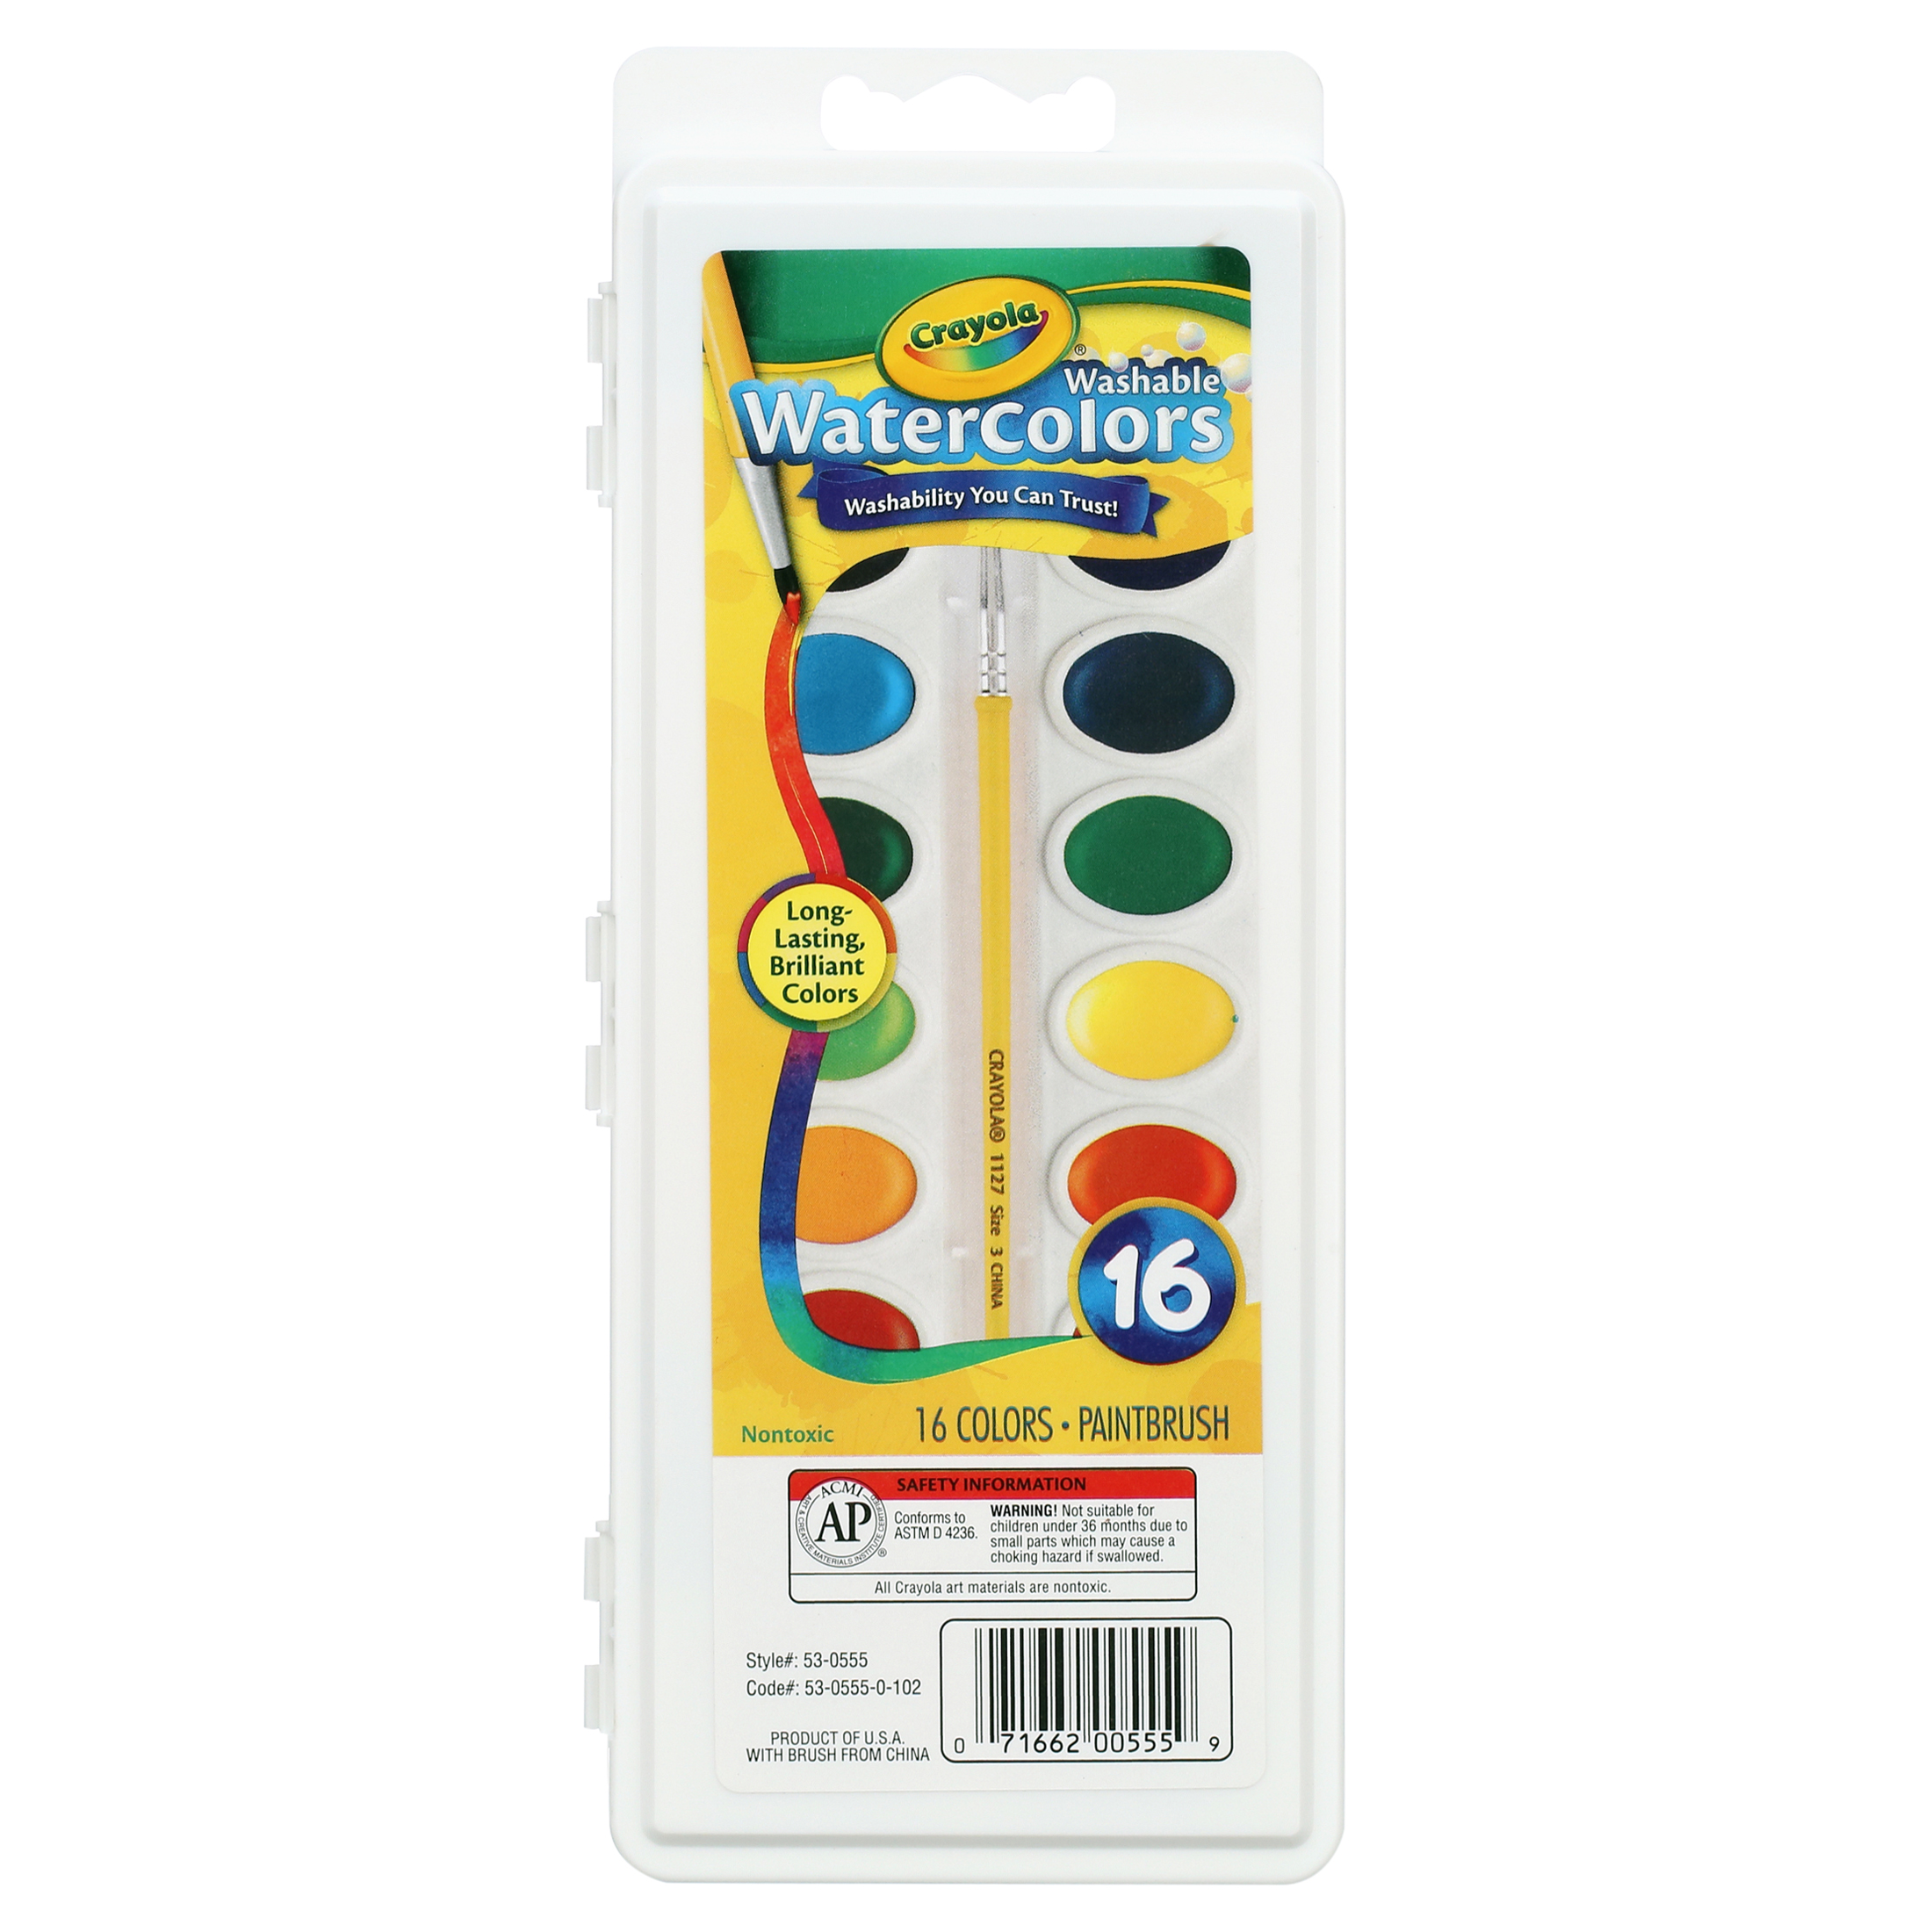 Crayola Washable Watercolor Set, 16-Colors - image 1 of 6